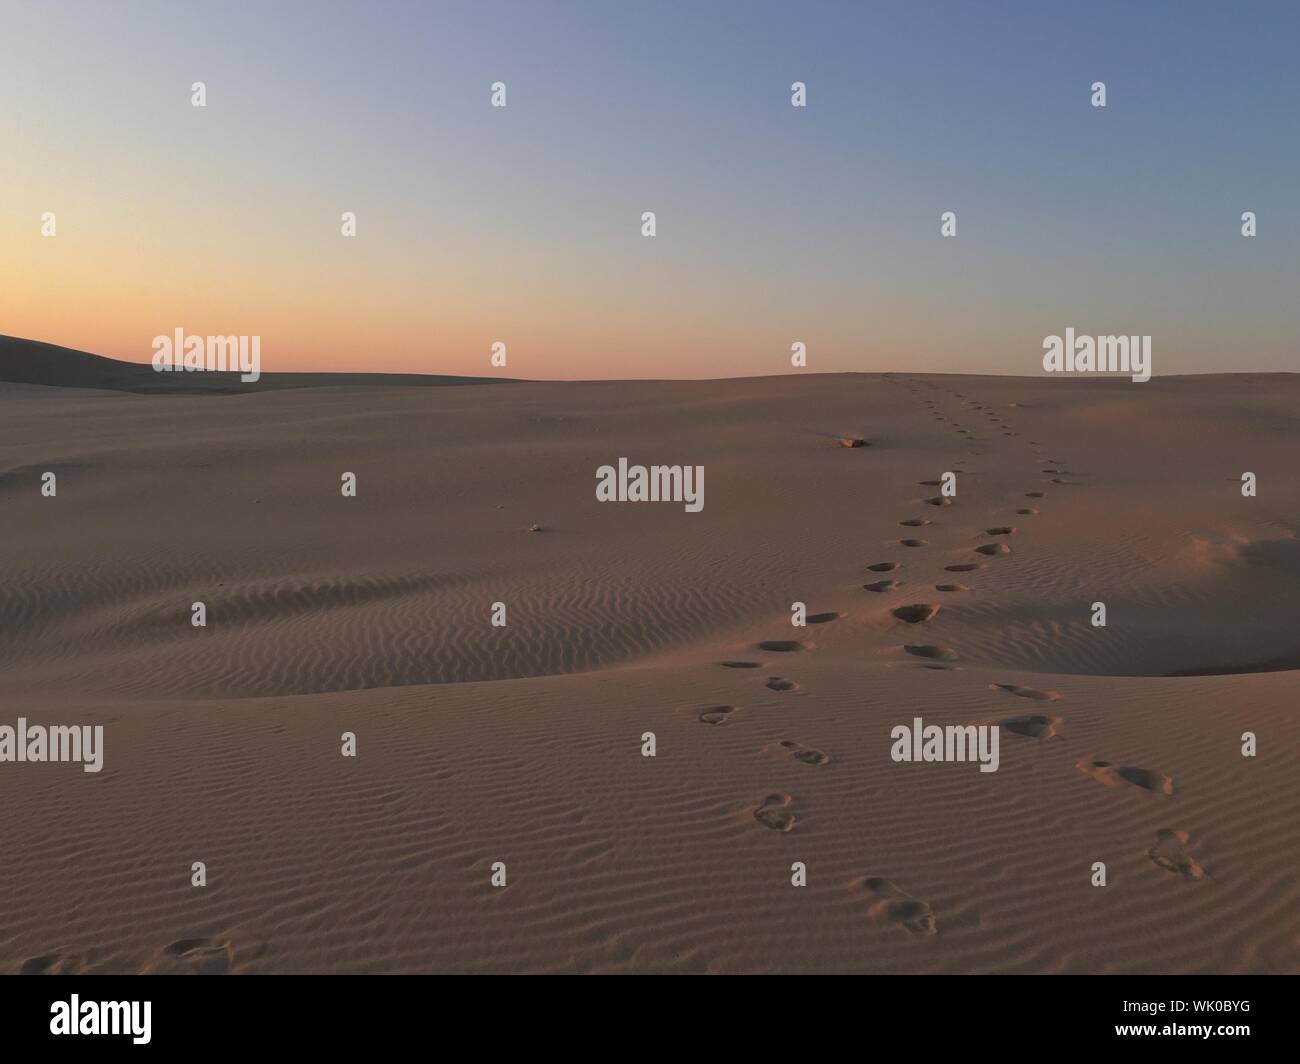 Footprints On Sand Dunes Against Clear Sky During Sunset At Port Stephens Stock Photo